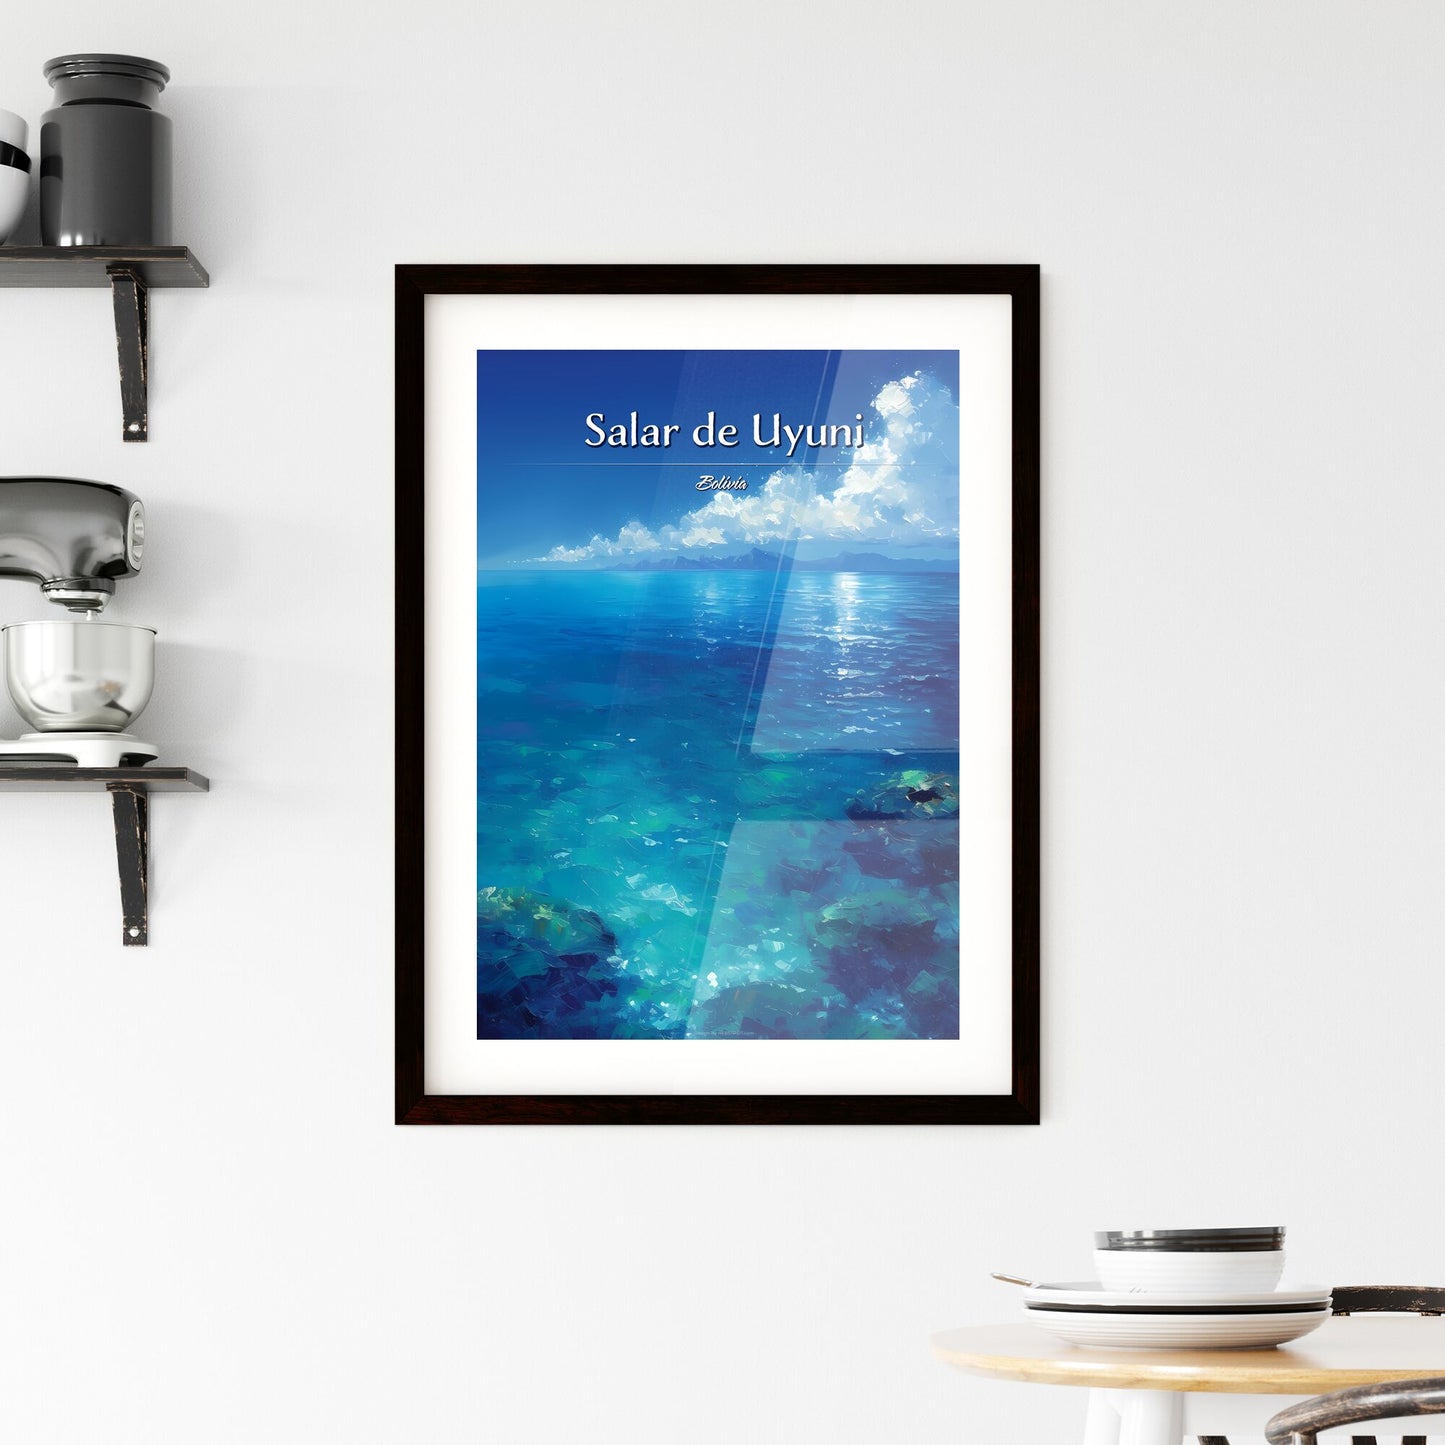 Salar de Uyuni, Bolivia - Art print of a blue ocean with rocks and clouds in the sky Default Title